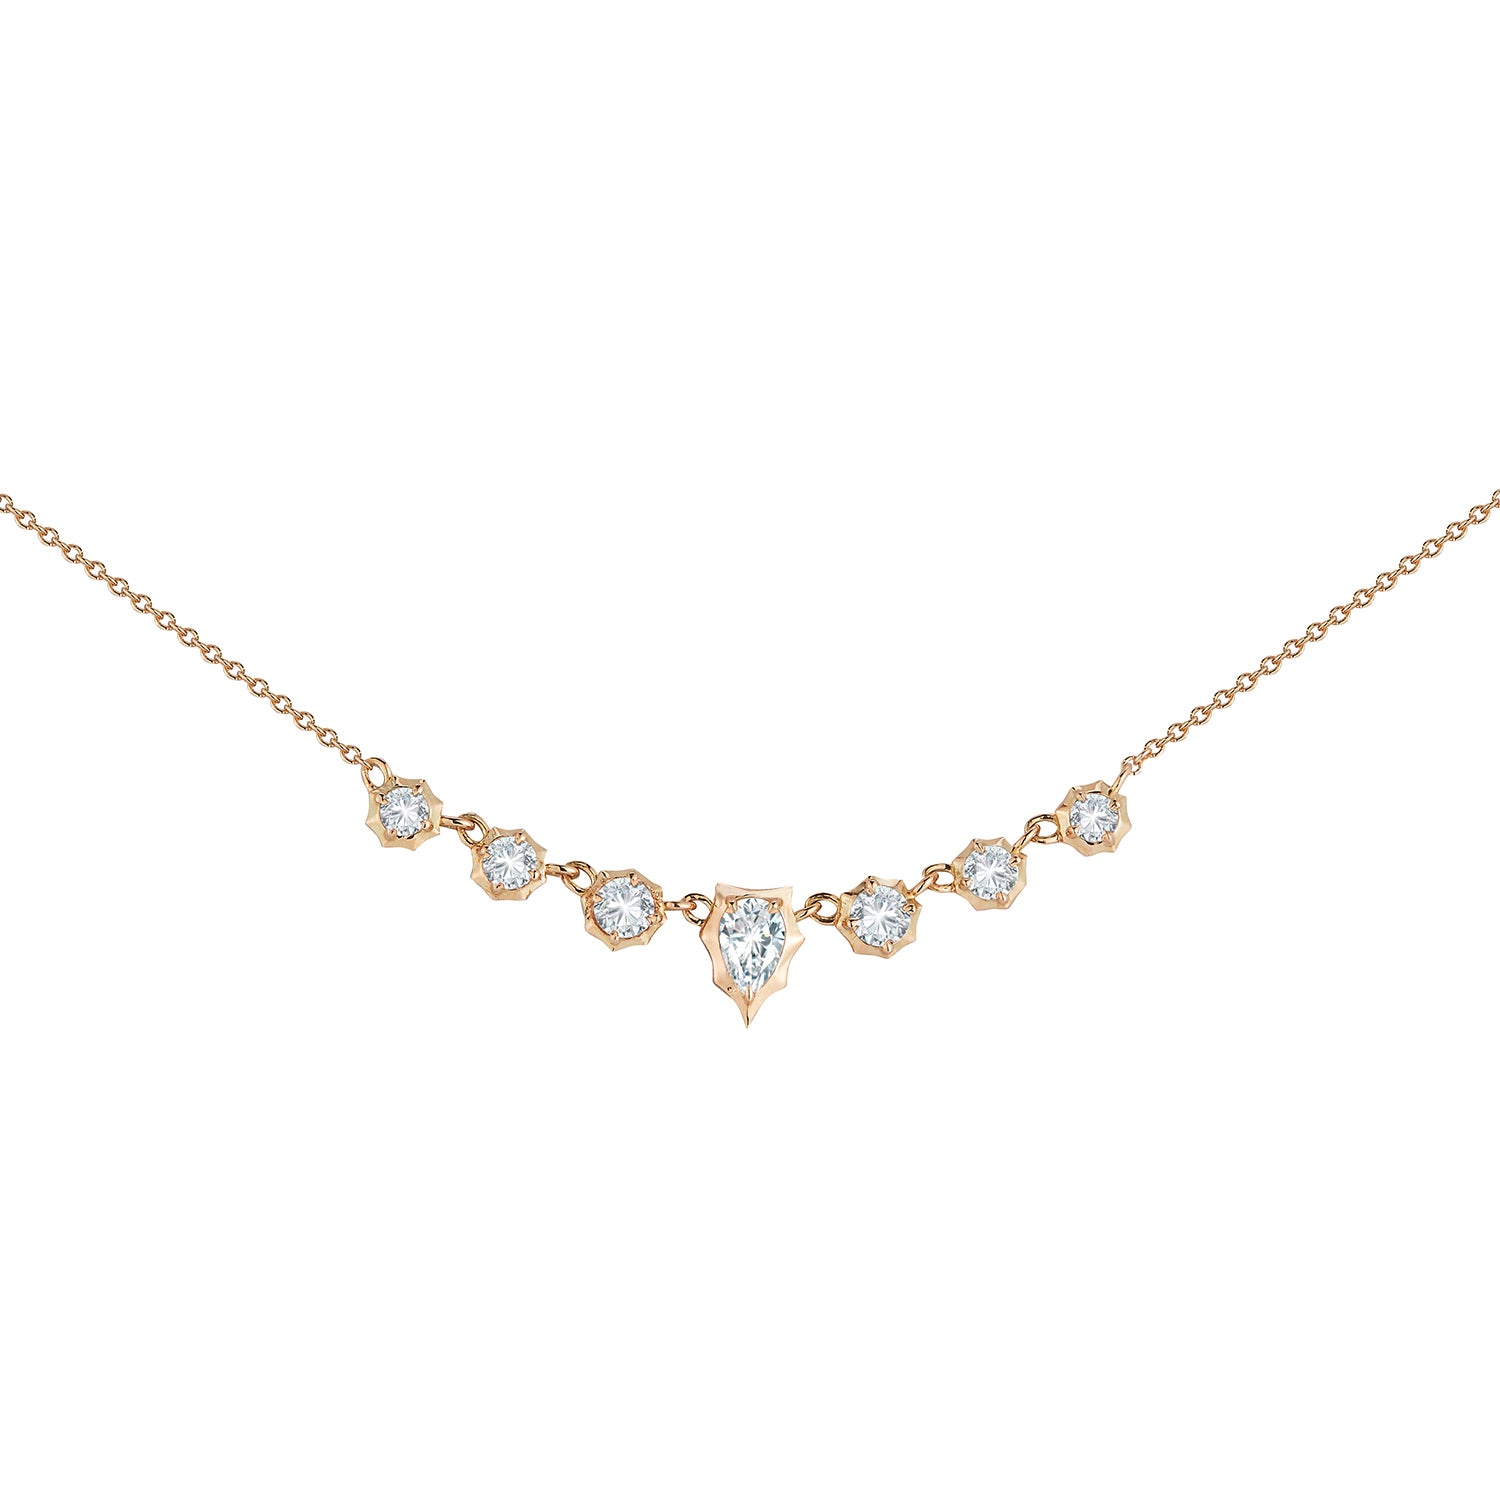 Small Envoy Necklace in 18K Rose Gold